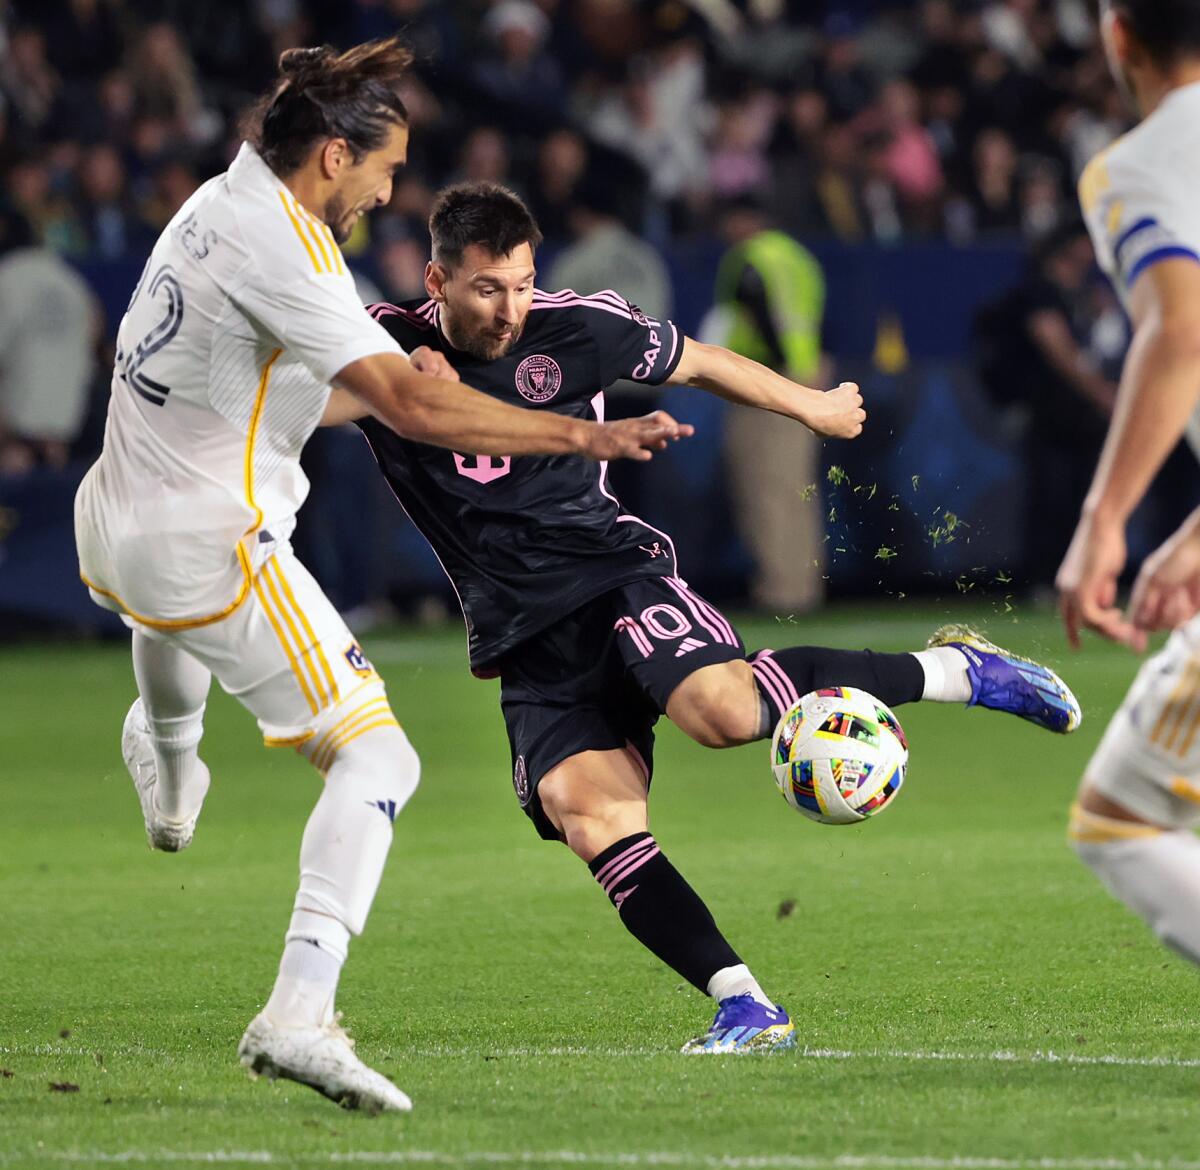 Inter Miami's Lionel Messi takes a shot on goal in front of Galaxy defender Martin Caceres during the first half Sunday.